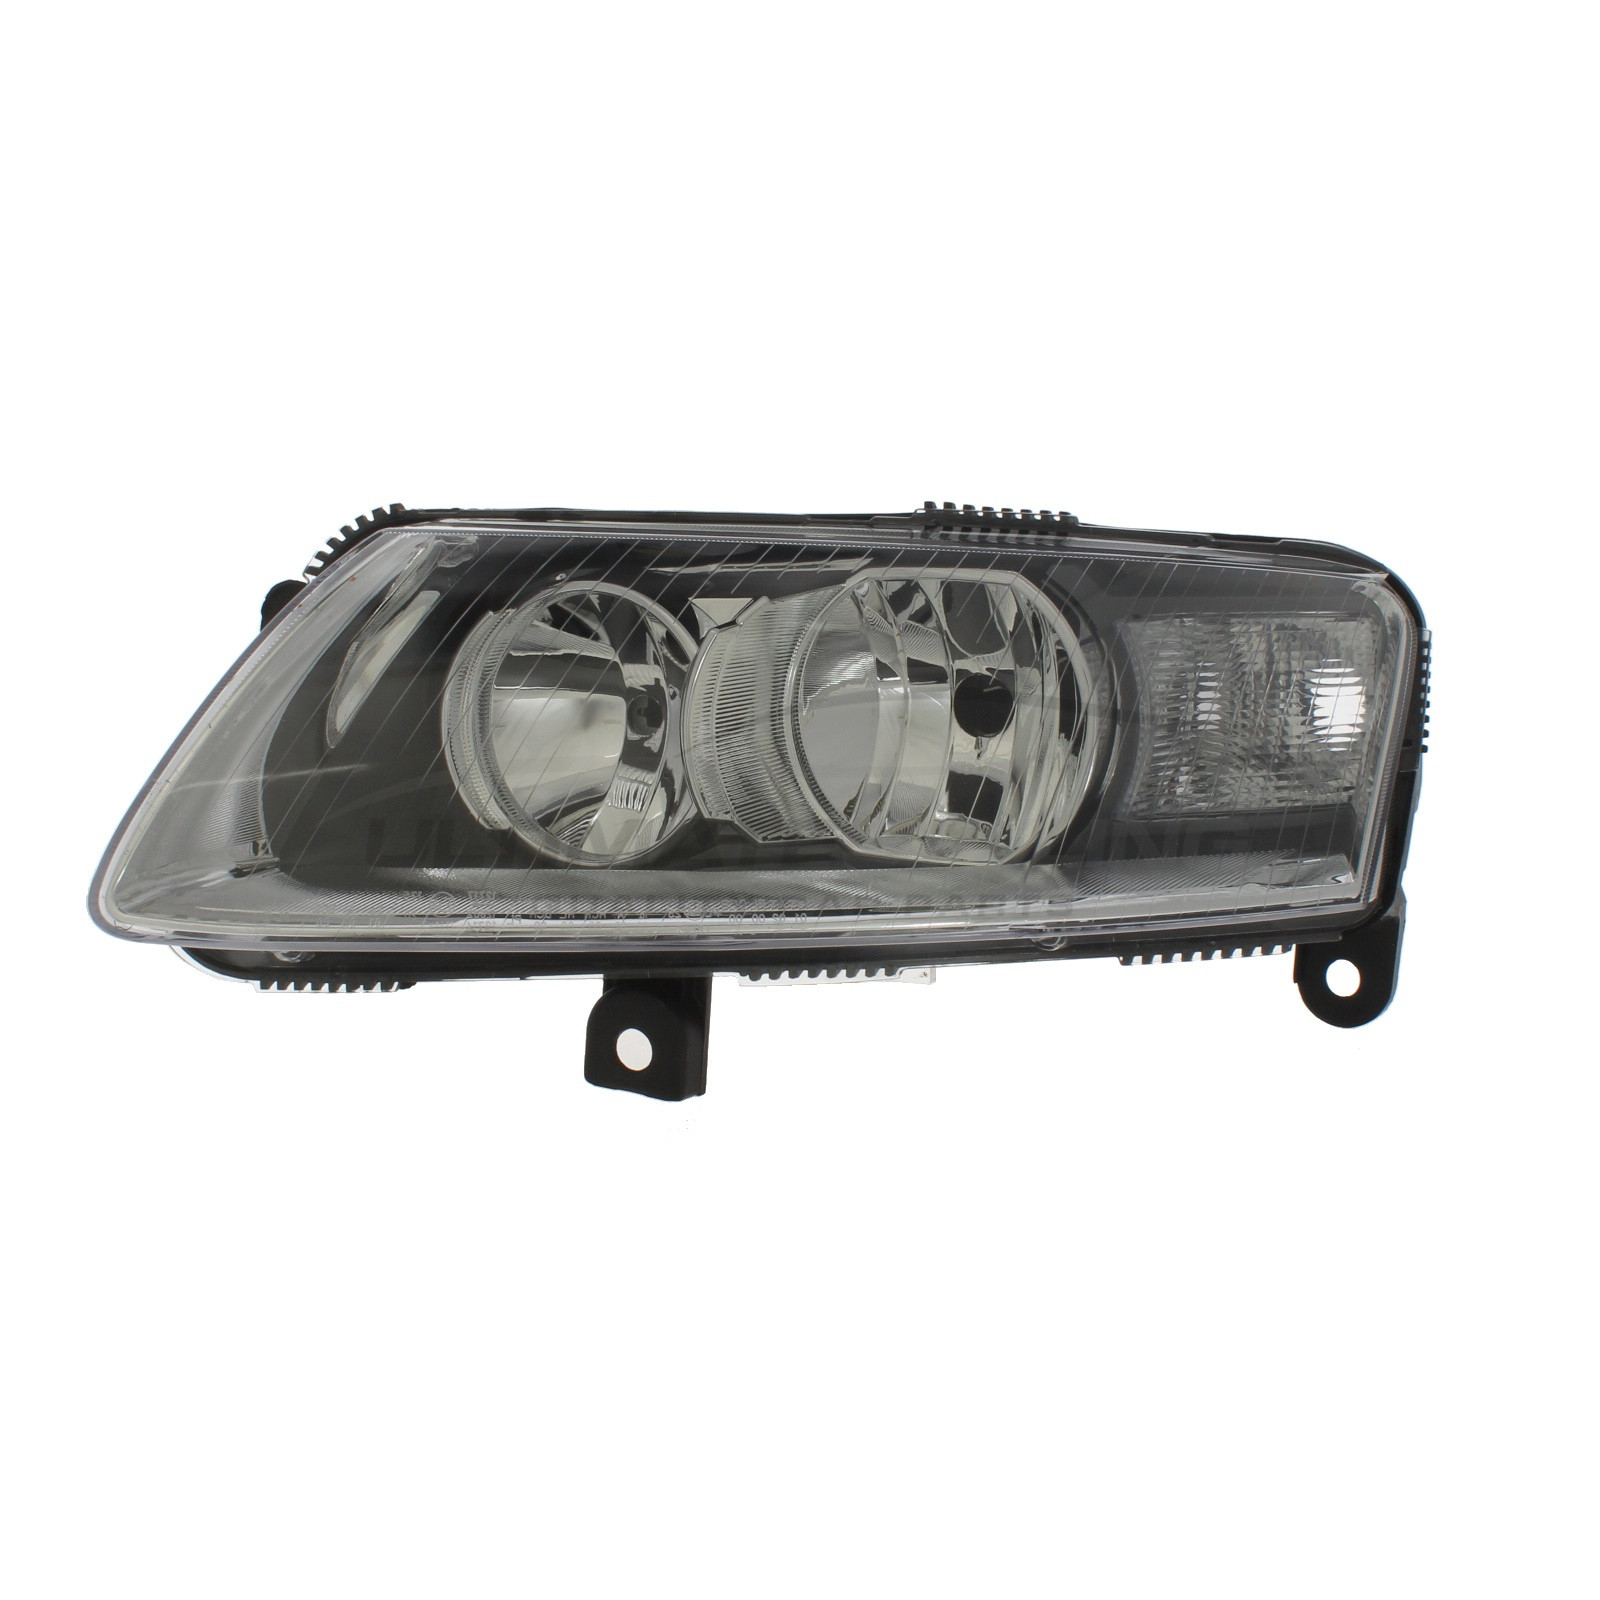 Audi A6 2004-2008, Allroad 2006-2009 Halogen, Electric Without Motor, Chrome Headlight / Headlamp Passengers Side (LH)